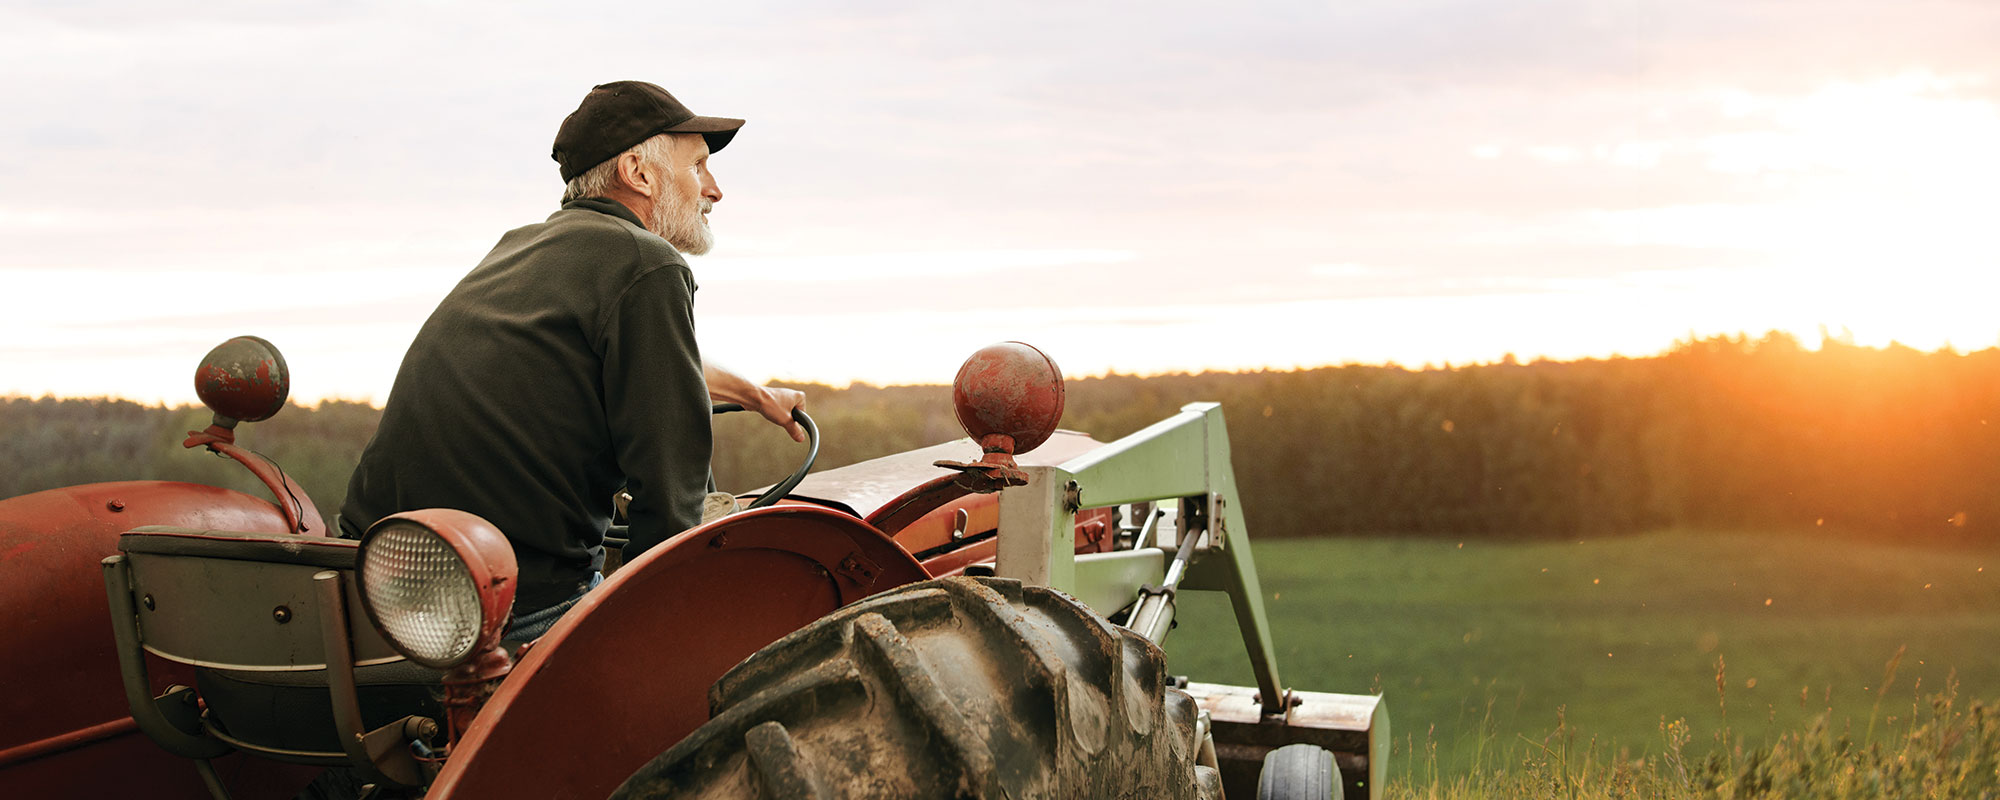 A farmer sittin gon a tractor looking over a field during sunset.